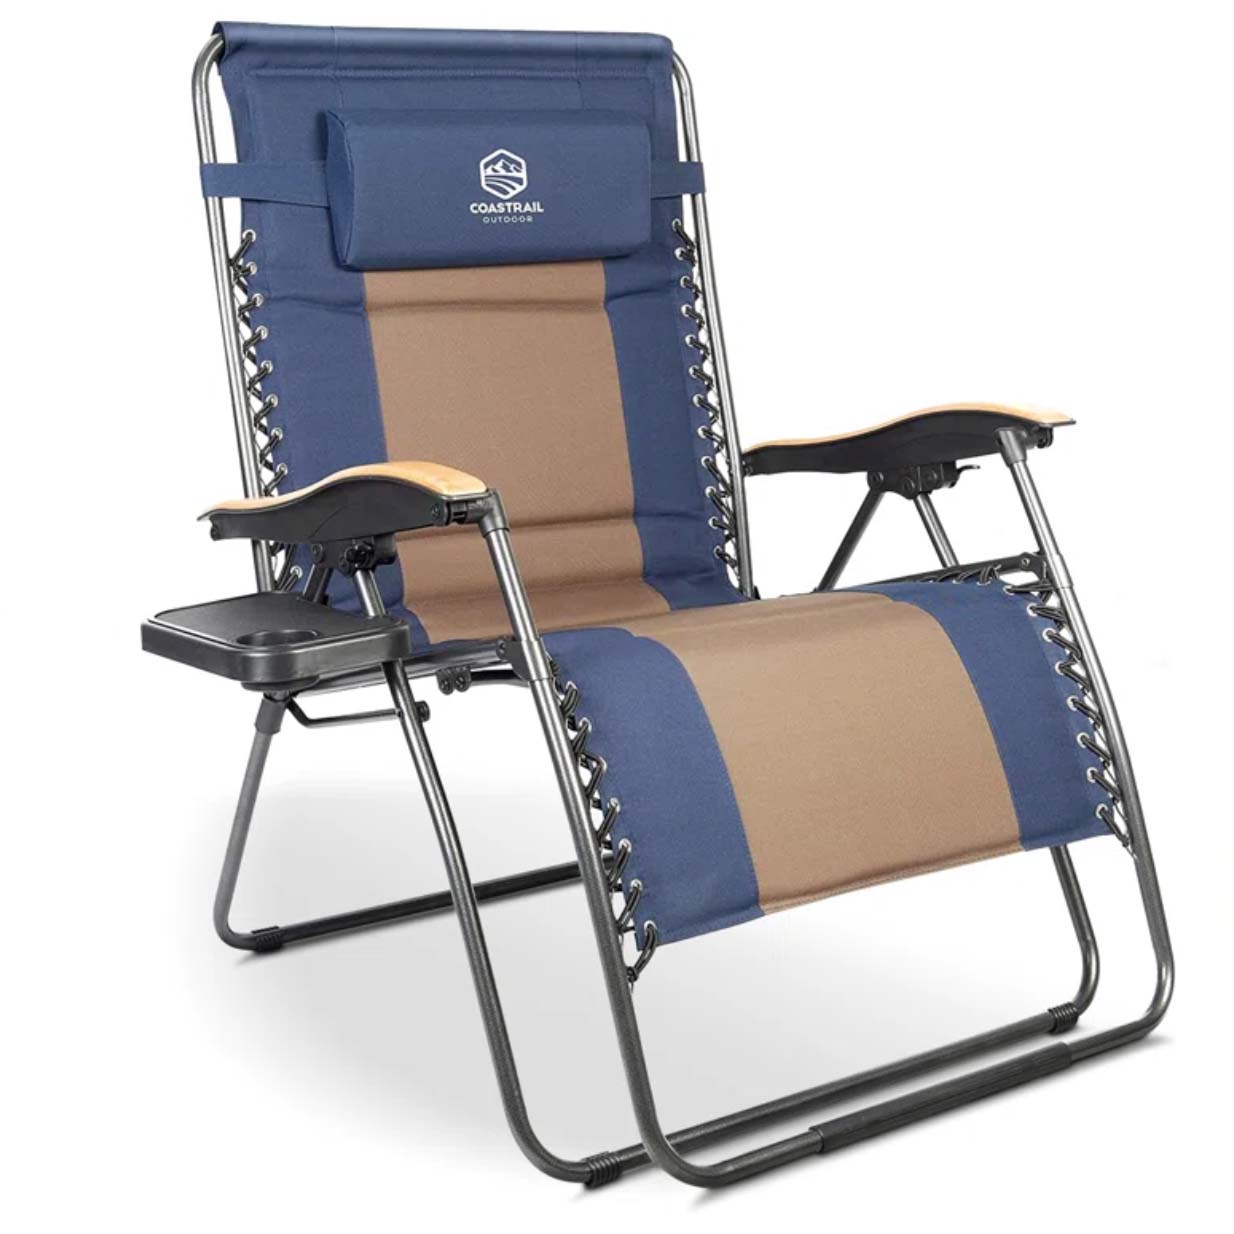 Nanika Folding Zero Gravity Chair Camping Chair Recliner With Backrest Wide Seat in blue and cream